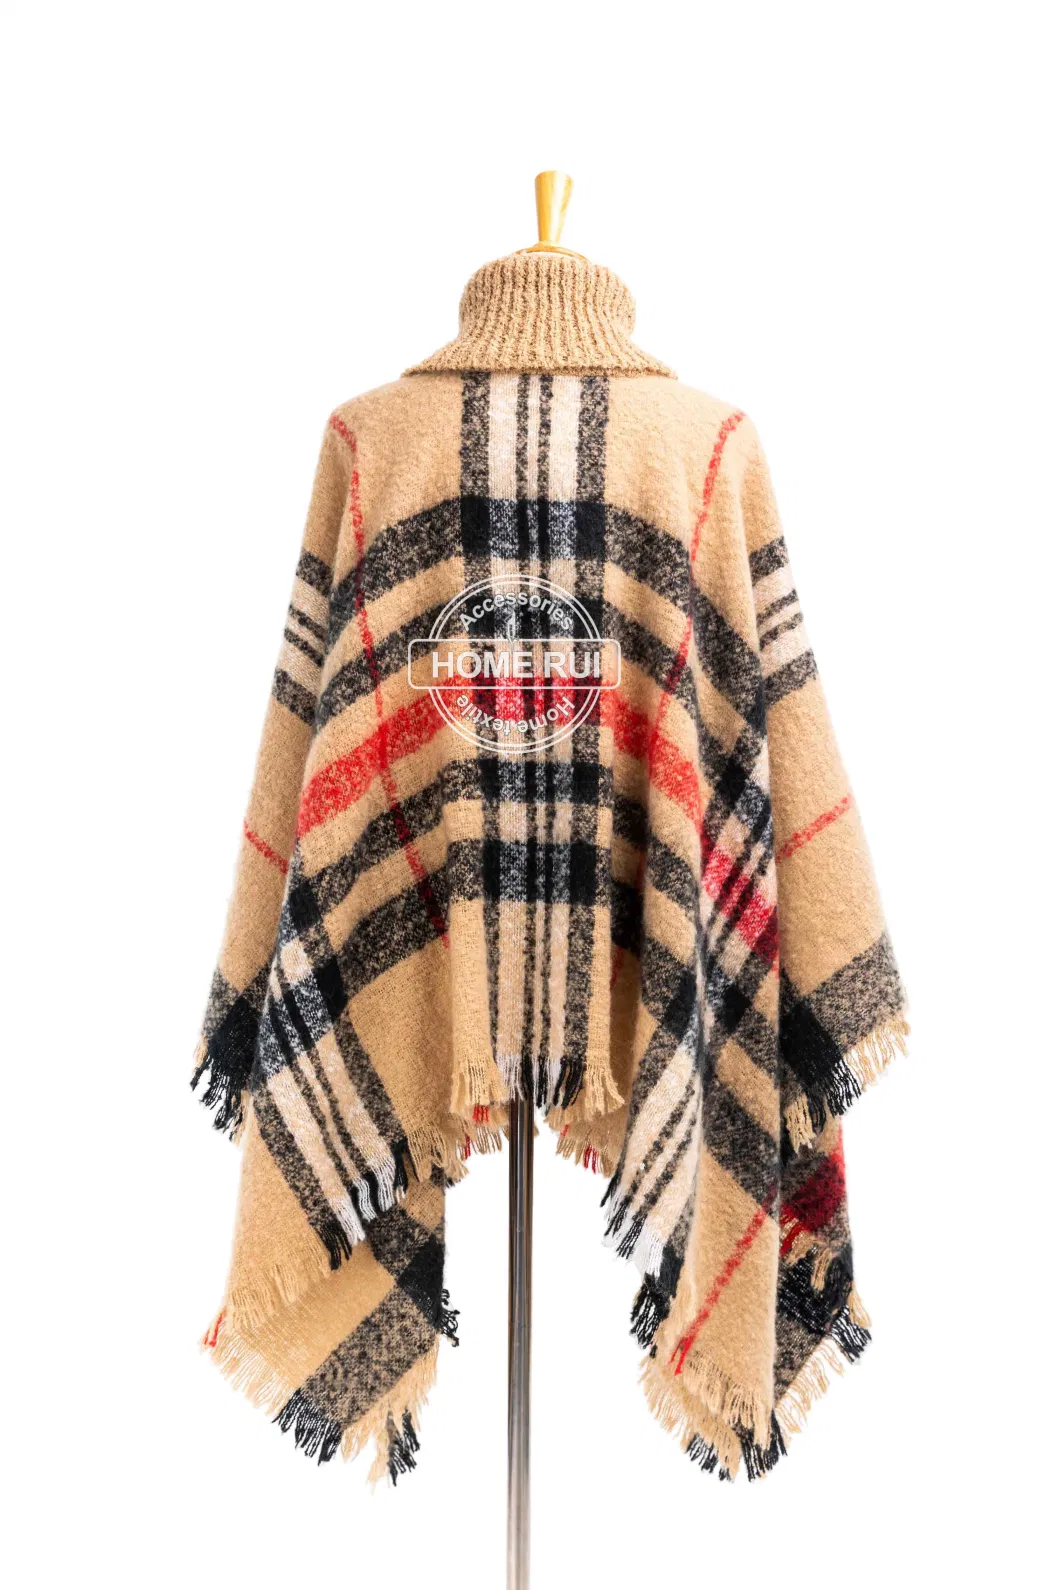 Spring Autumn Woman Lady Warm Fashion Woven Acrylic Boucle Yarn Brushed Brown/Camel Colour Fringe Pullover Wraps Grids Plaid Checks Shawl Turtleneck Poncho